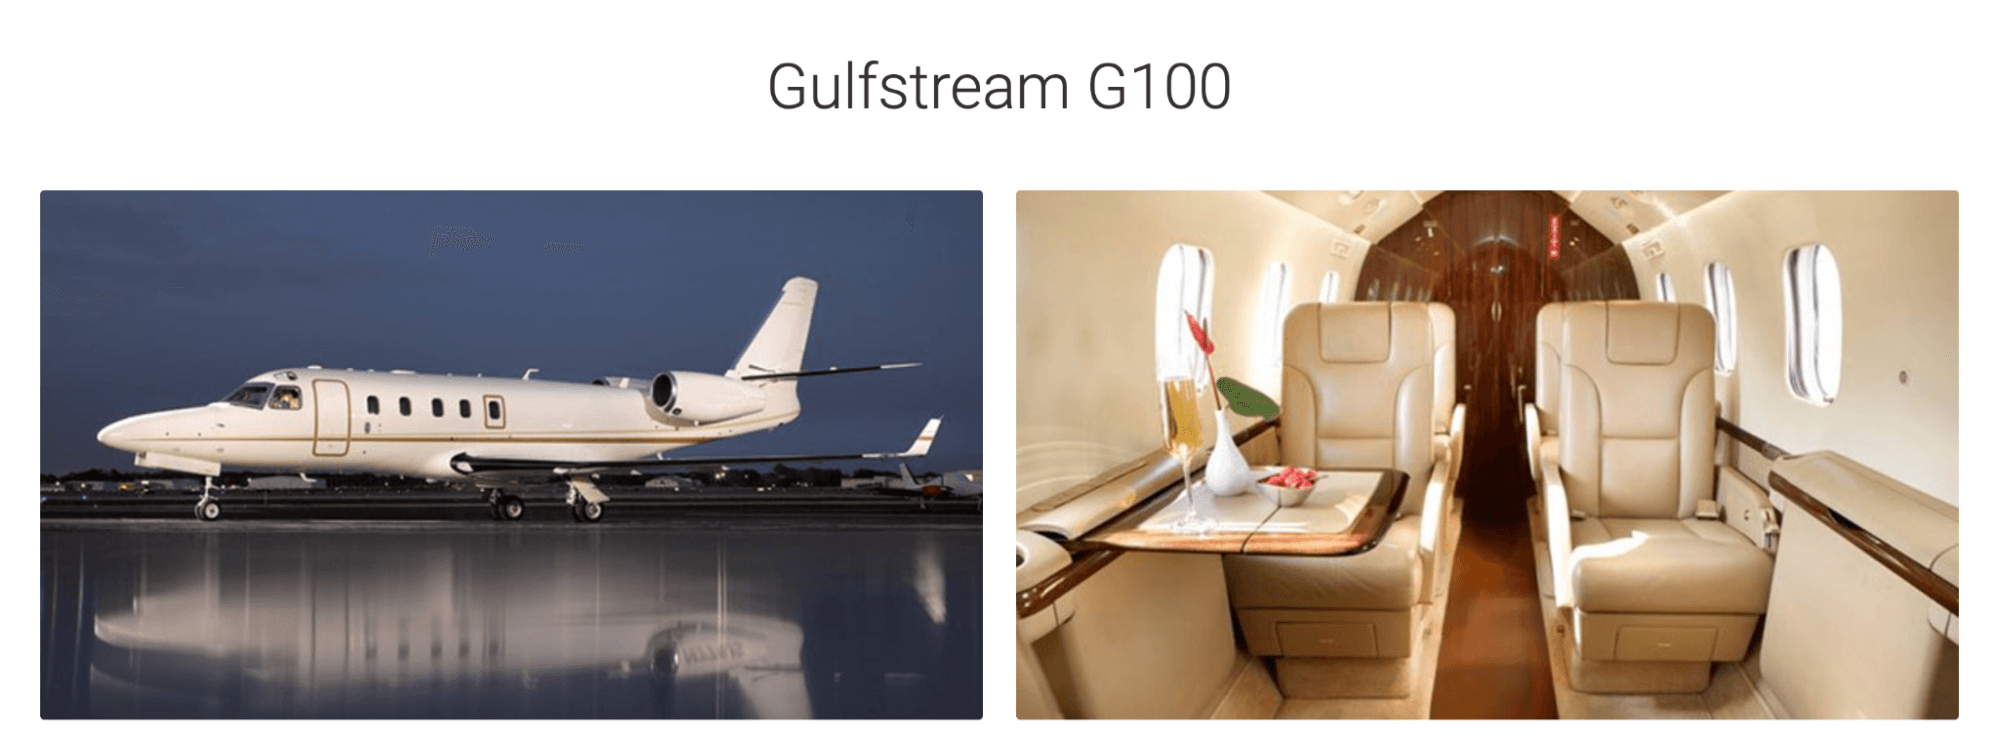 The picture shows the interior and exterior of Gulfstream G100 jets available from JetOptions.